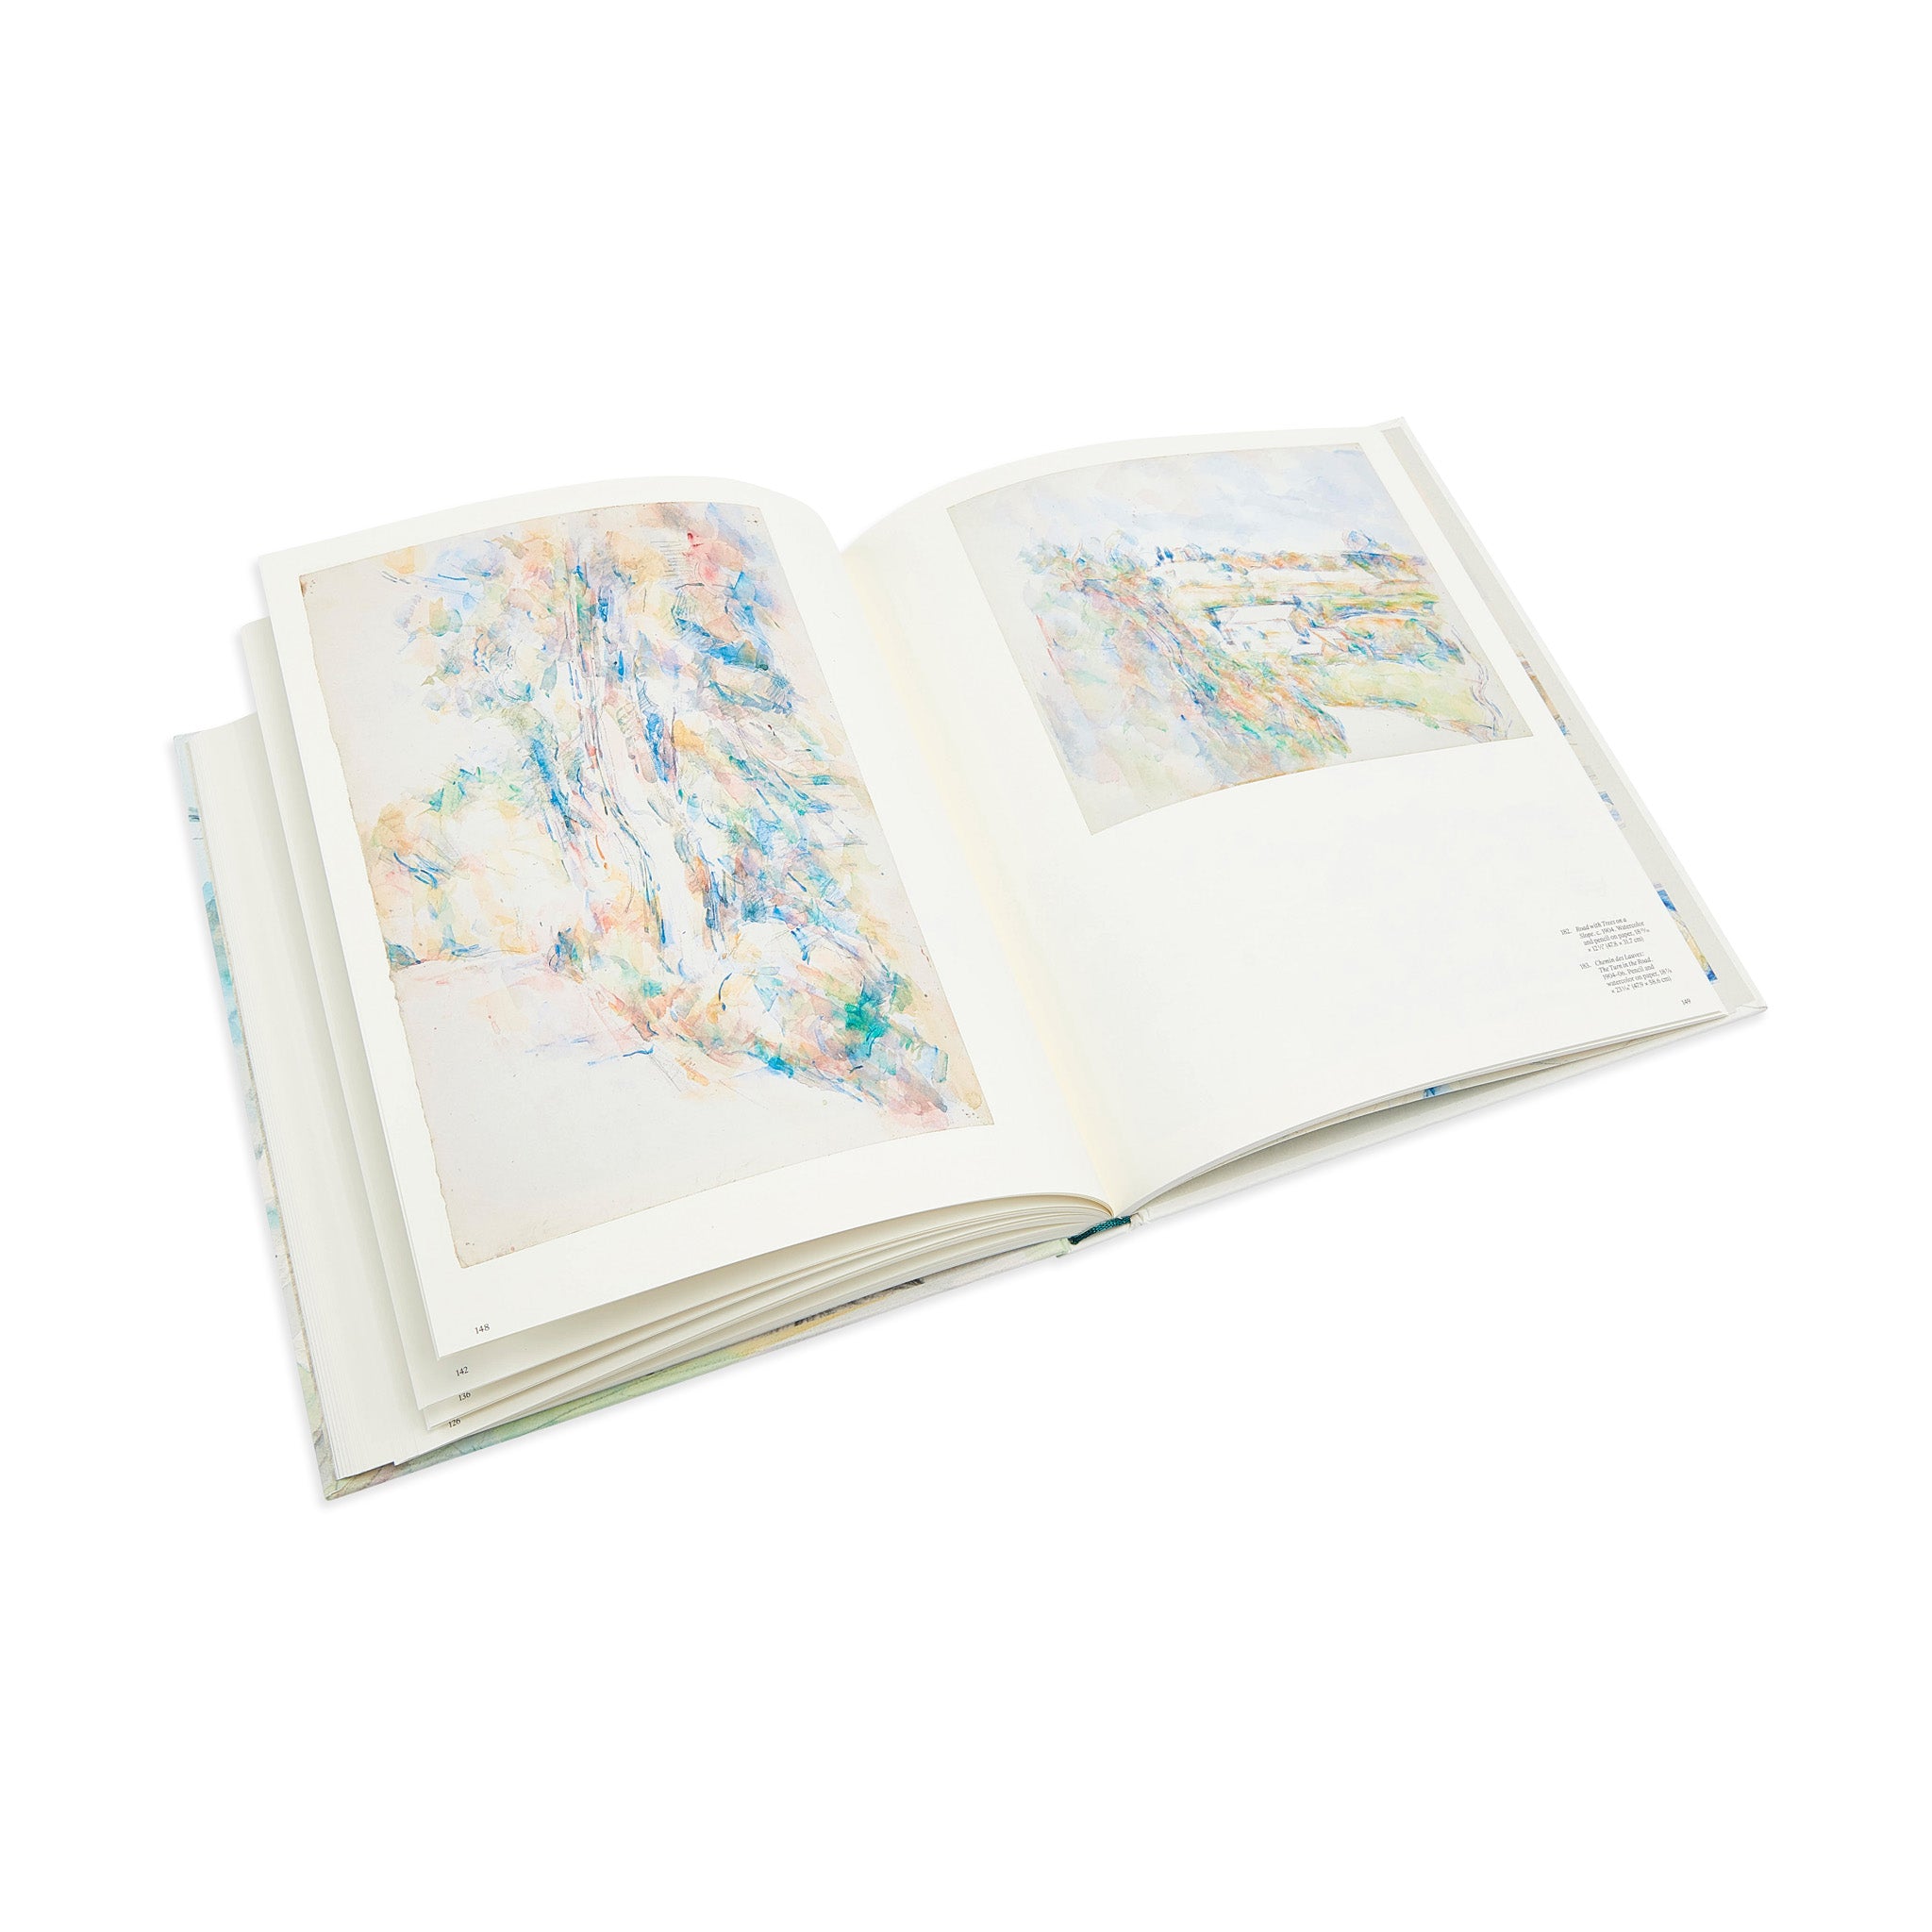 Cézanne Drawing - Hardcover – MoMA Design Store